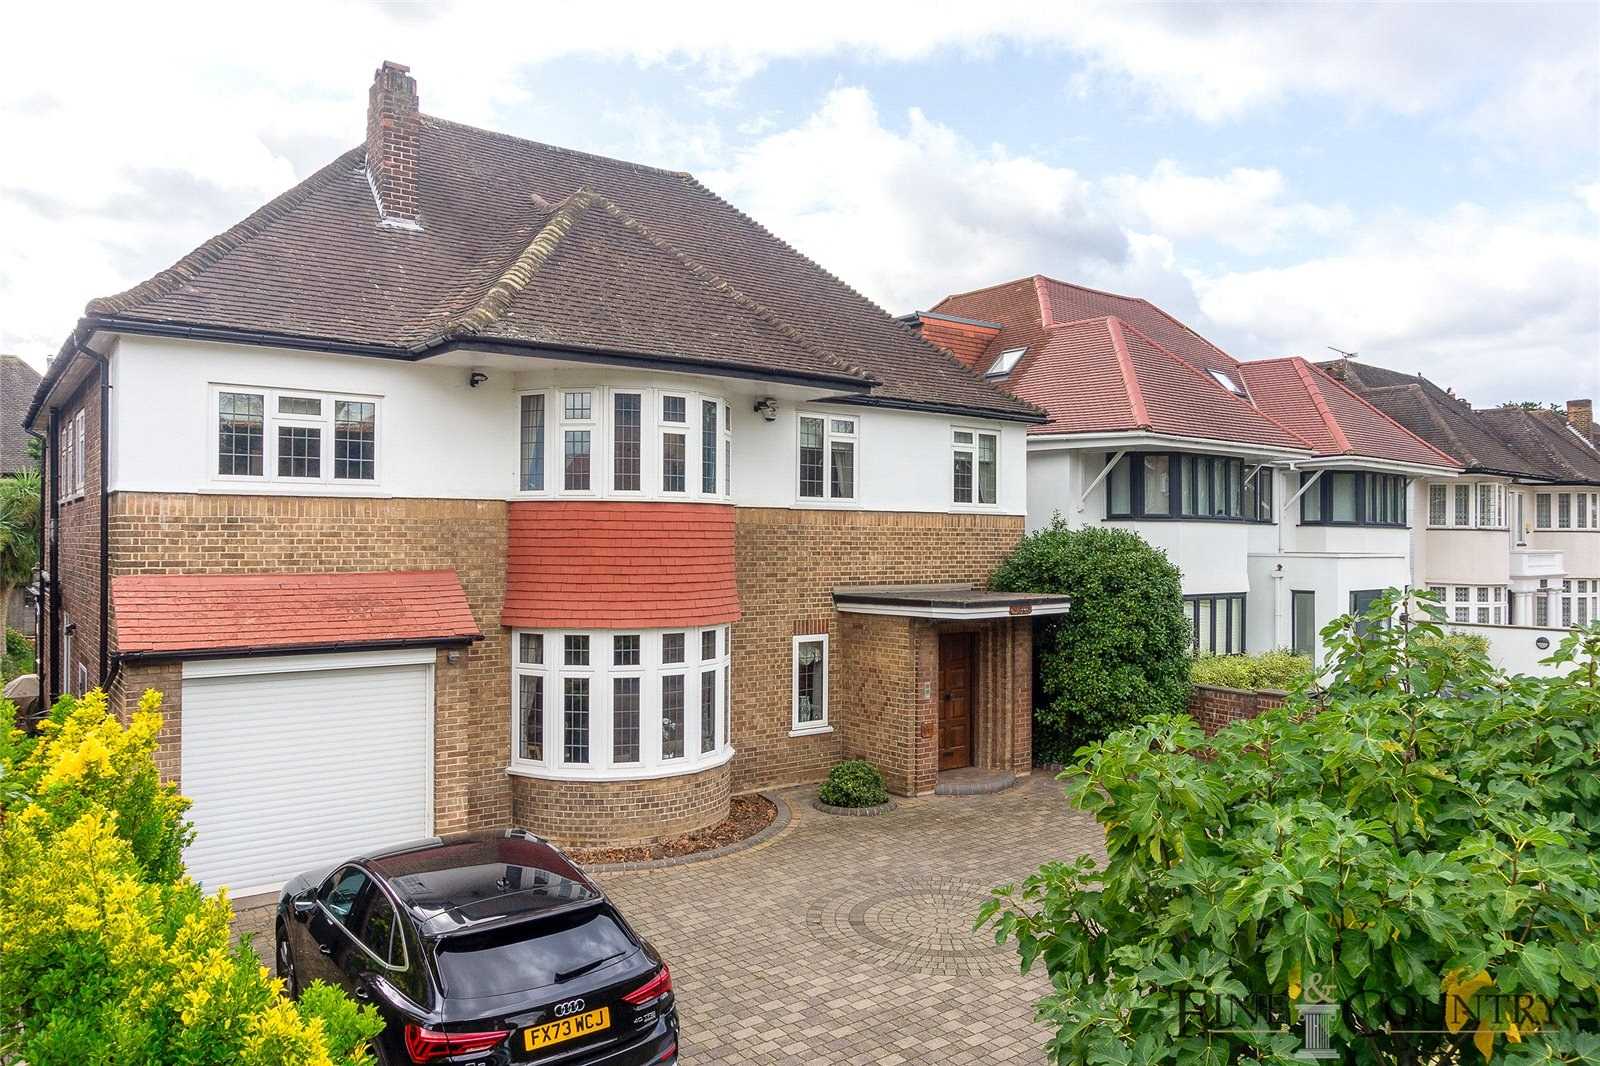 House in Cricklewood, Brent 12314047